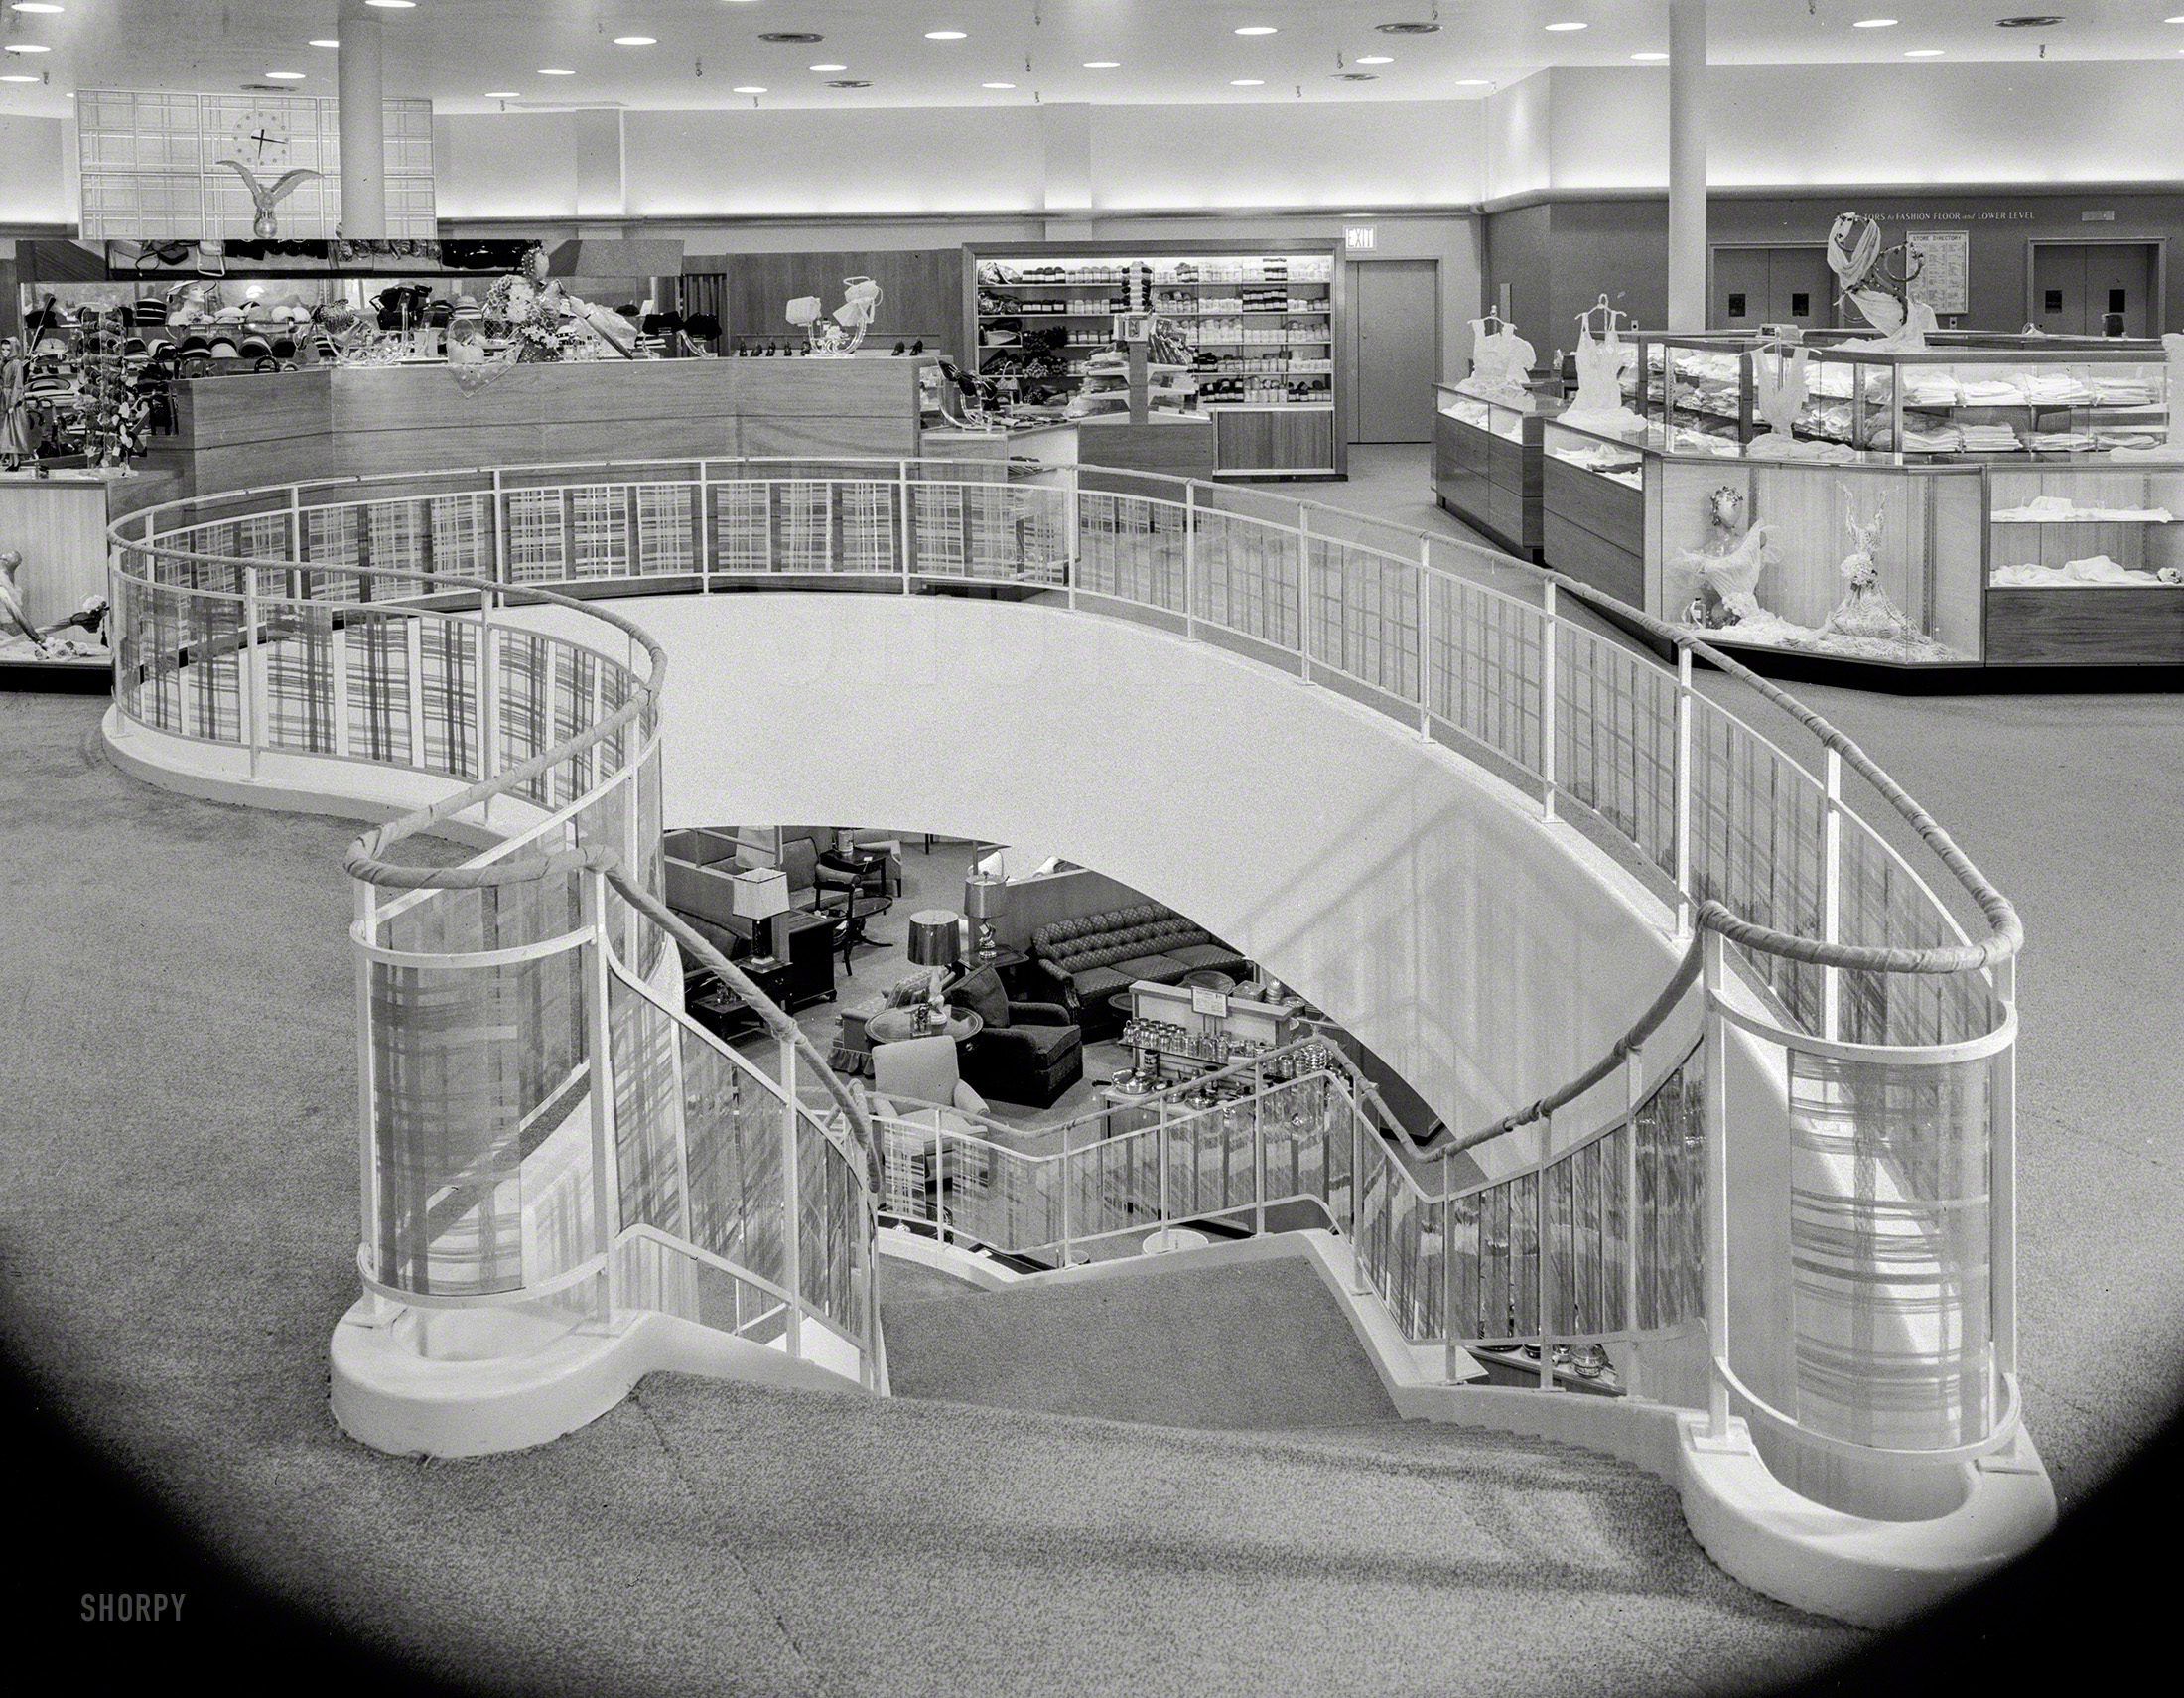 May 17, 1951. "John Wanamaker, Great Neck, Long Island. Staircase I." Two departments of this New York department store; we wonder if Alice and Trixie ever ventured out this far. 4x5 negative by Gottscho-Schleisner. View full size.